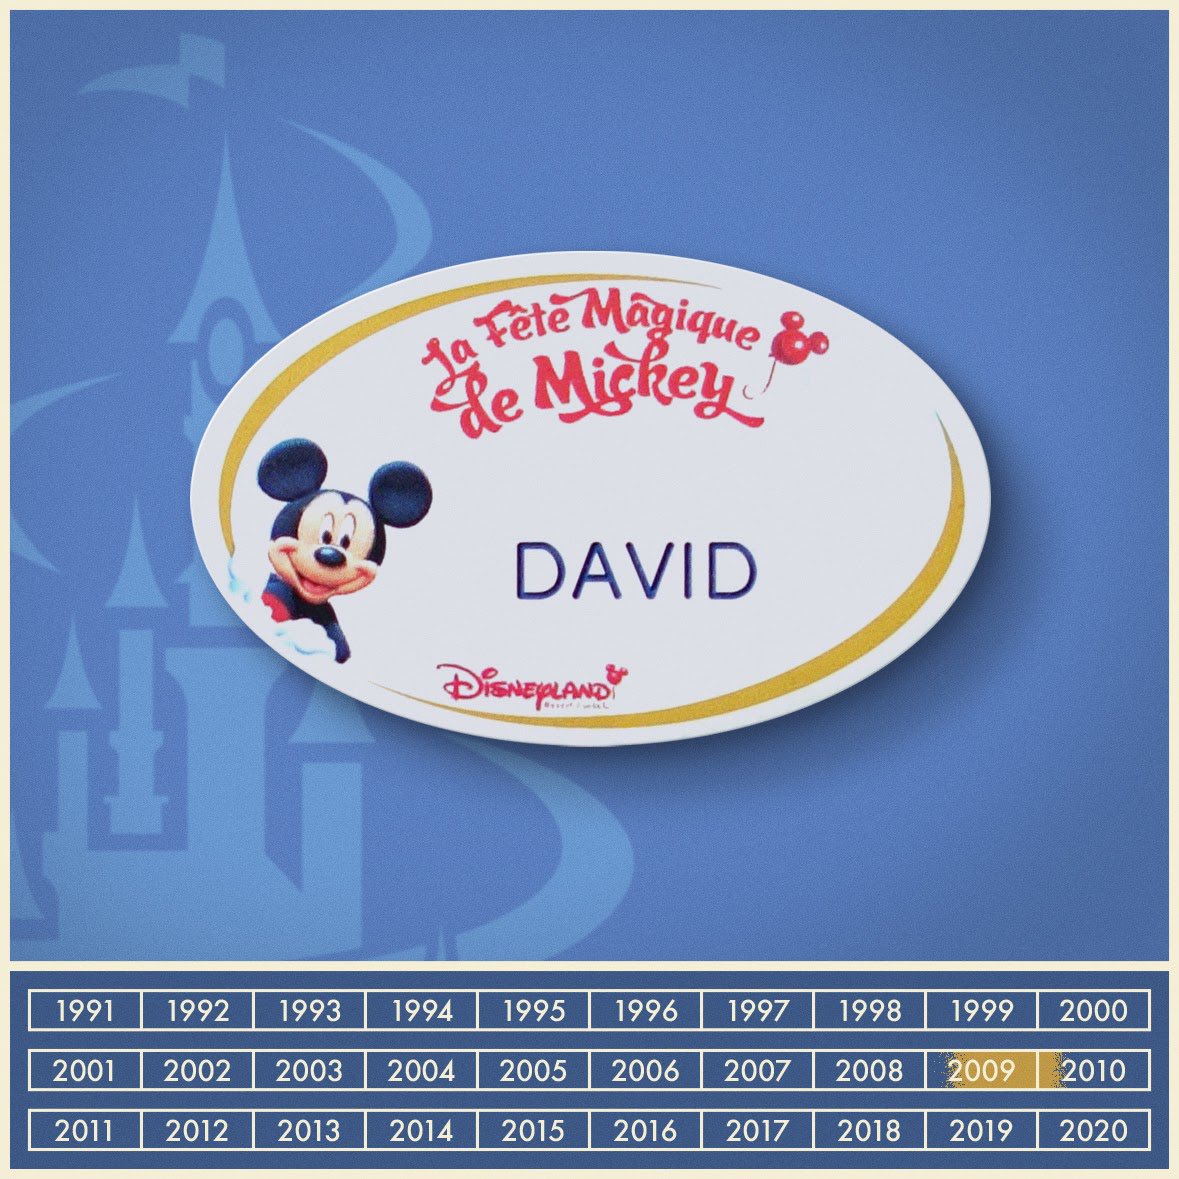 The first of these theme years was “Mickey’s Magical Party,” with special entertainment offerings dedicated to the character’s 80th birthday. Shortly after these nametags were introduced, the resort name reverted to the simpler “Disneyland Paris.”